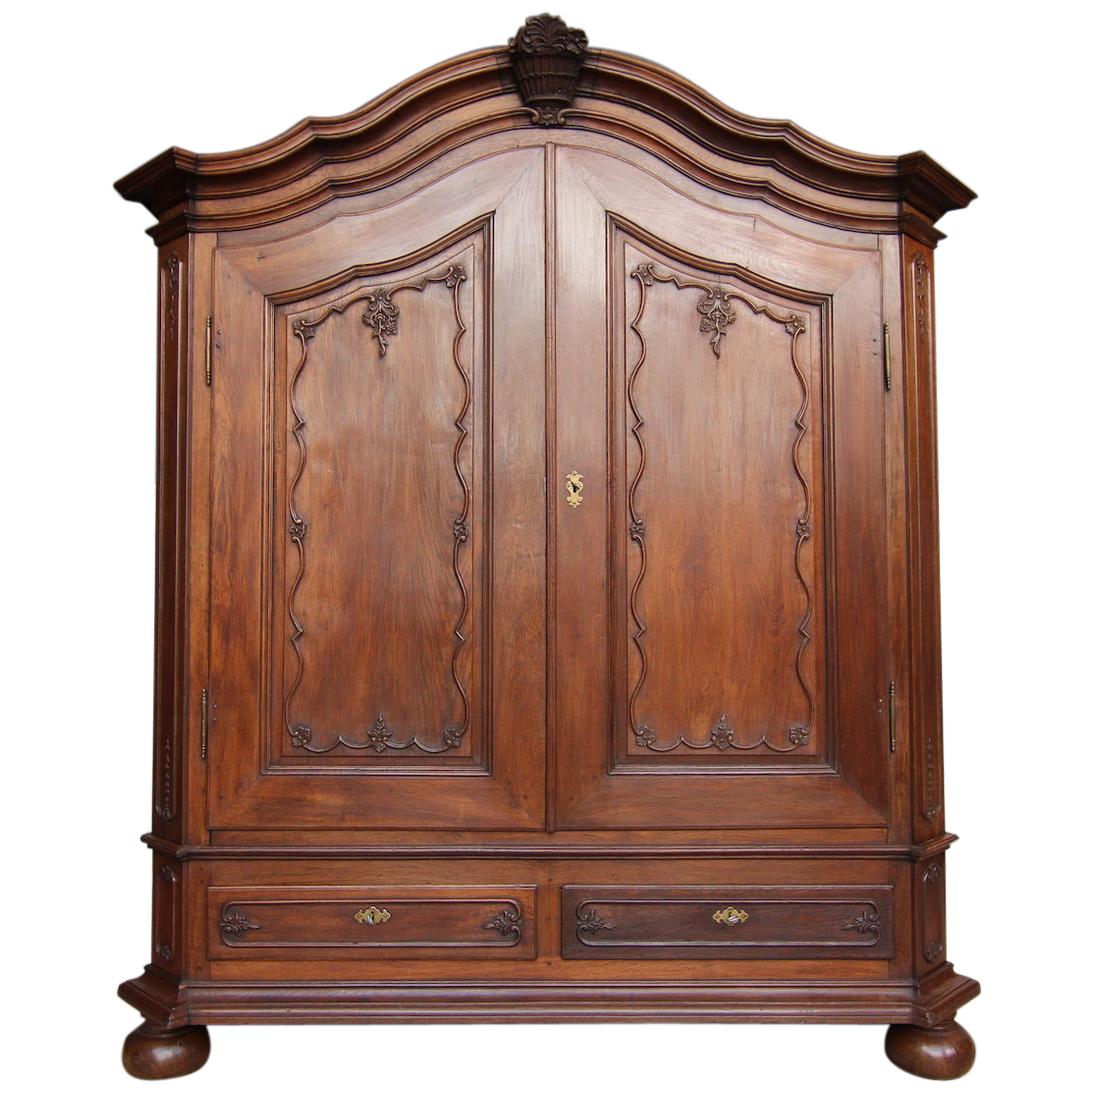 18th Century German Baroque Armoire Made of Oak